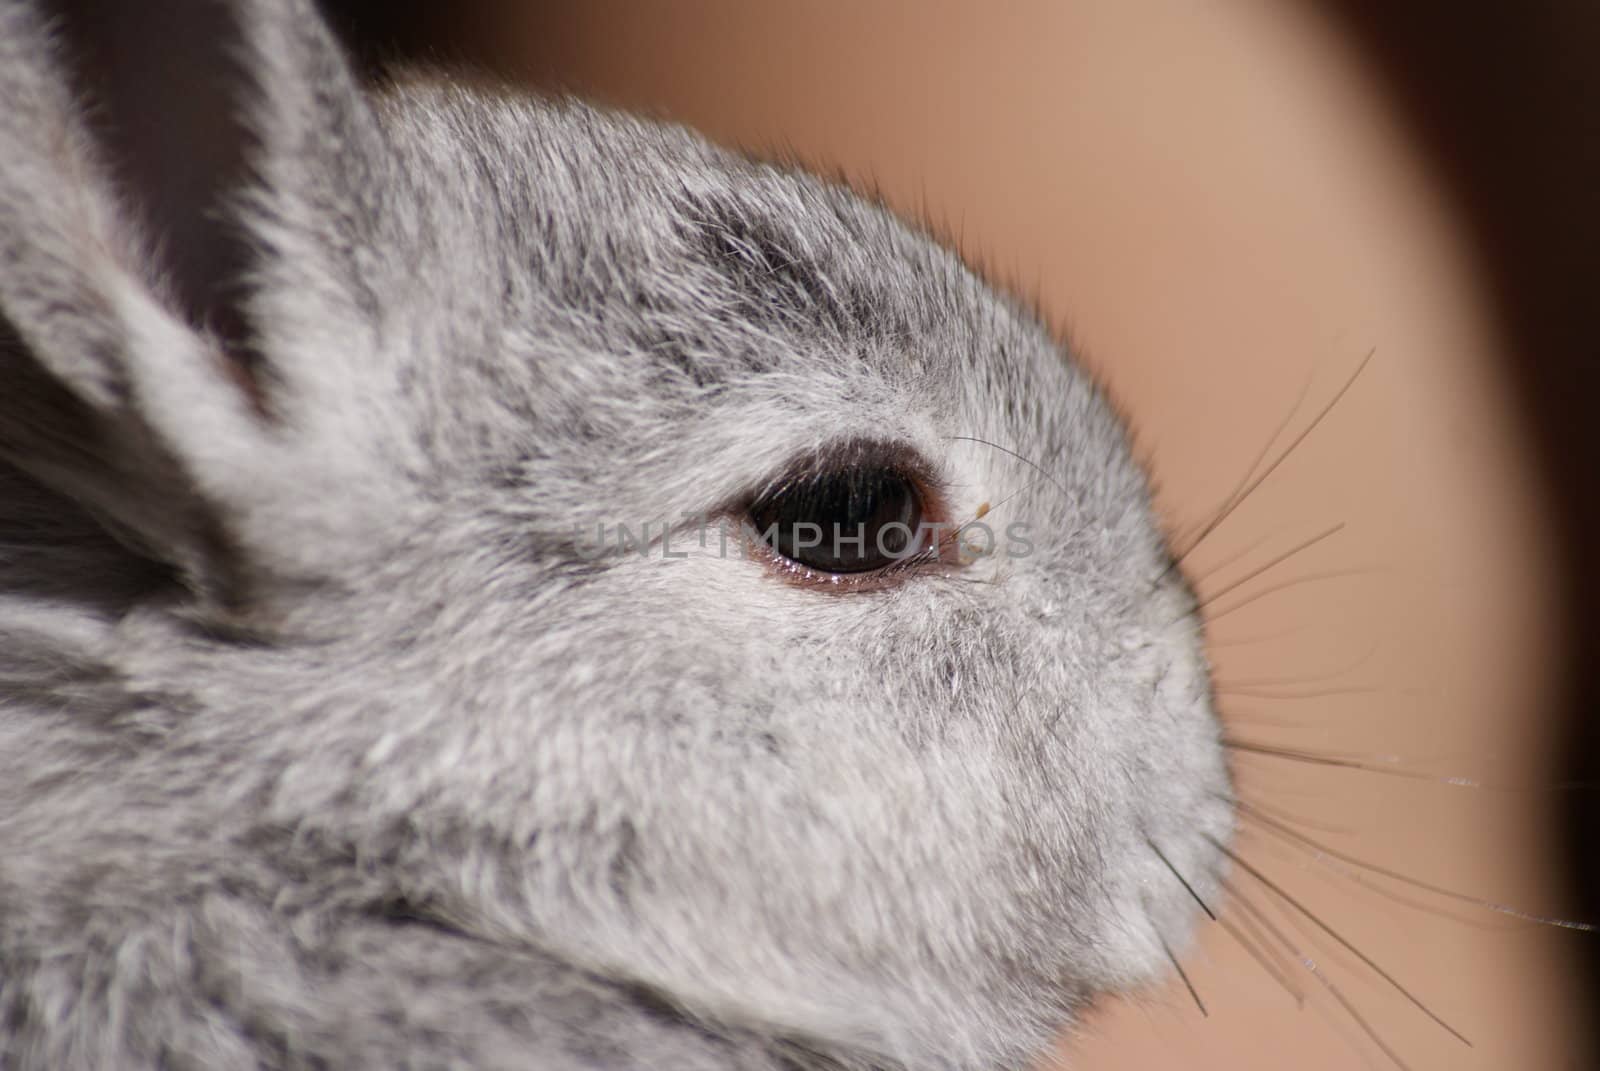 Rabbit by photografmts